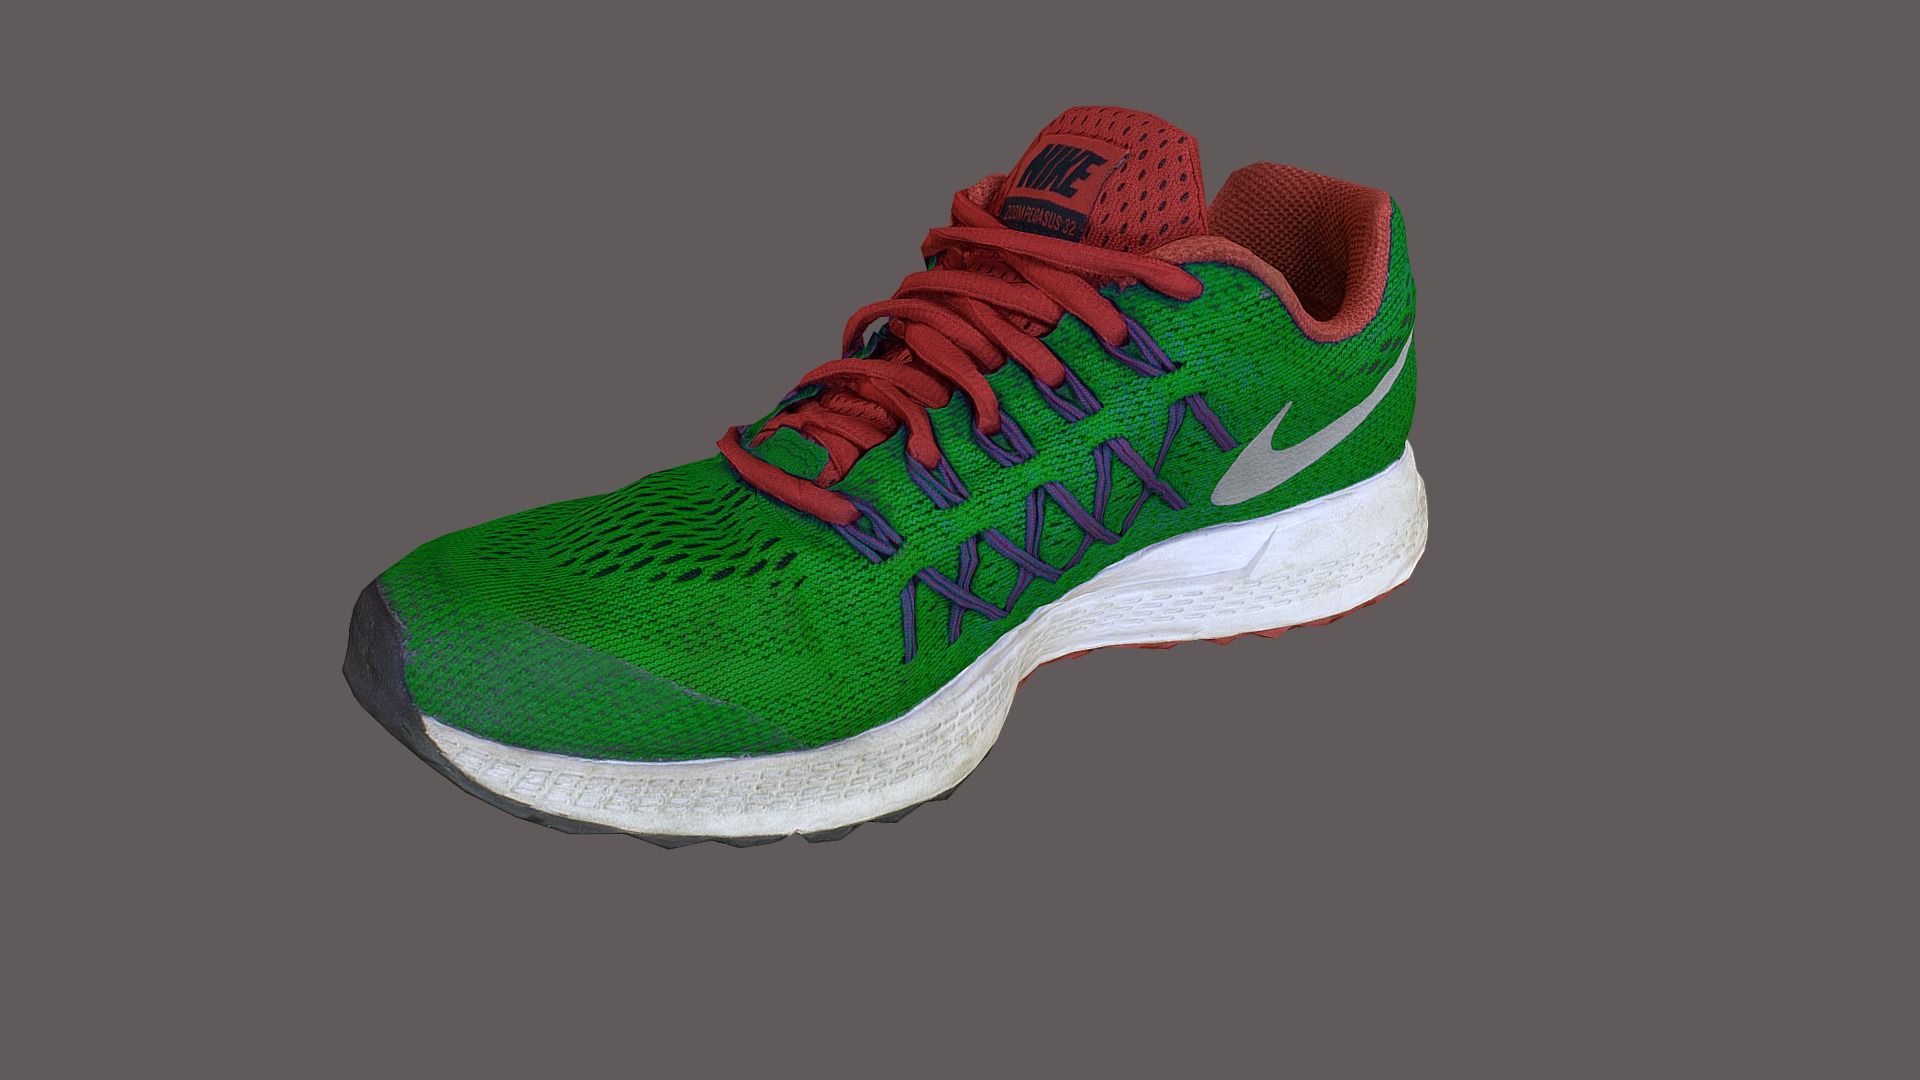 3D model Sneaker low poly model - This is a 3D model of the Sneaker low poly model. The 3D model is about a green and red shoe.